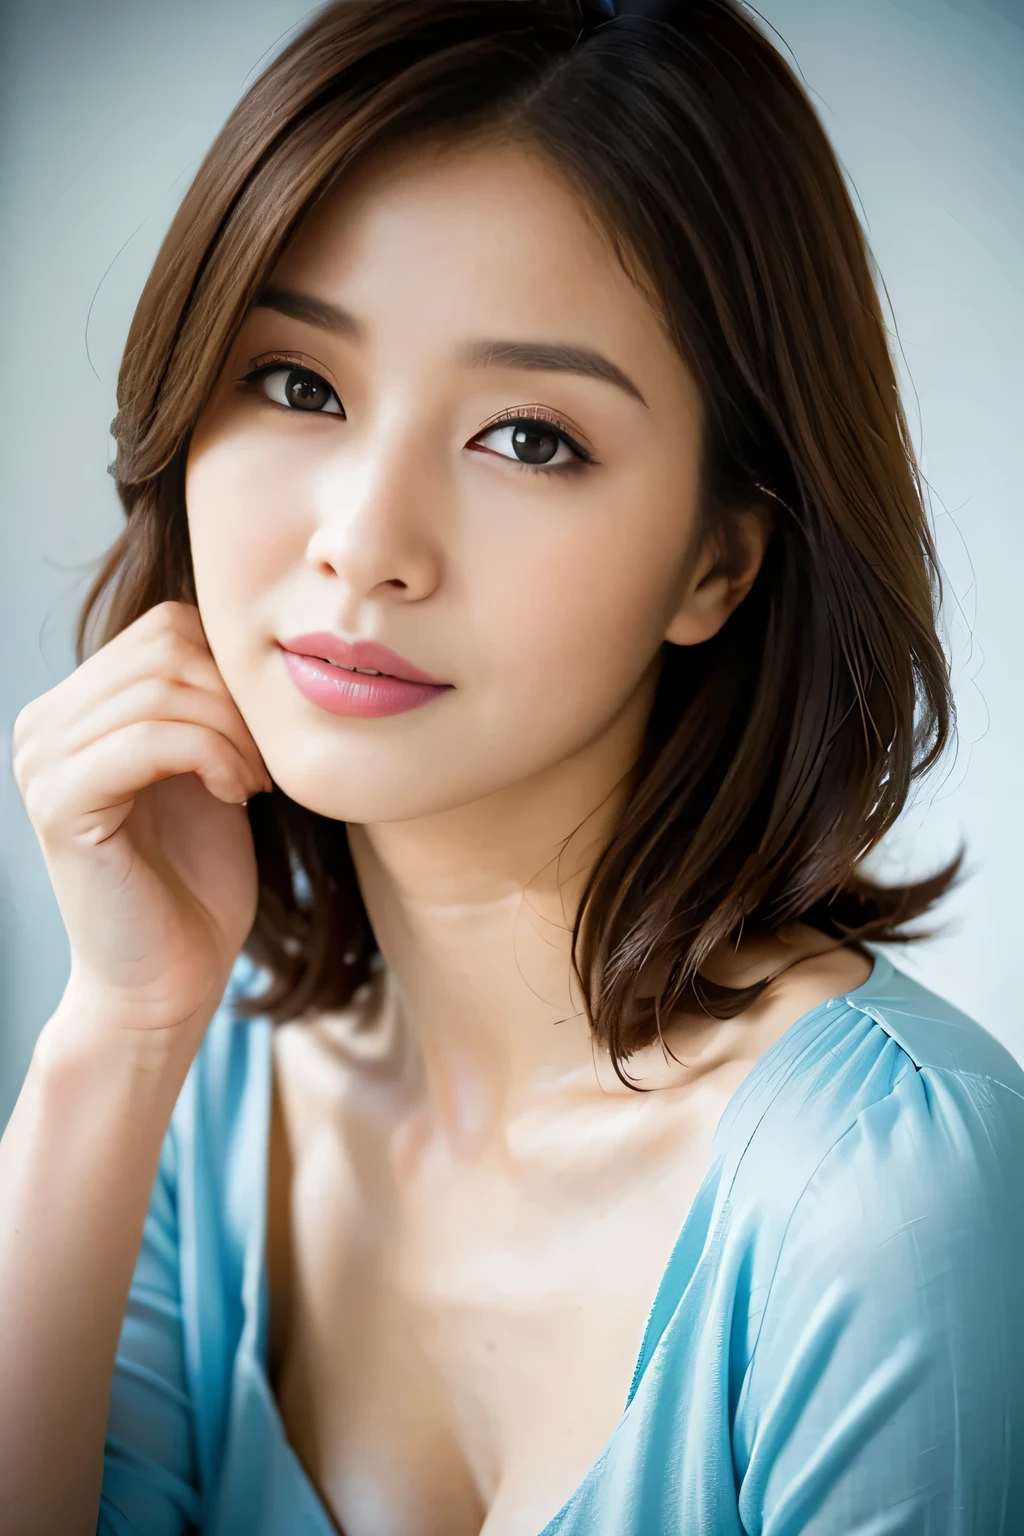 (highest quality,8K,masterpiece),anatomically correct,
Close-up of a woman in a blue dress with her hand on her face, beautiful korean woman, beautiful young japanese model,gorgeous young japanese woman, Cute girl - well-groomed face, beautiful portrait image, 60mm portrait, high quality portrait, 70mm Portrait, nice delicate face, feminine beautiful face, Beautiful woman,
big breasts,
